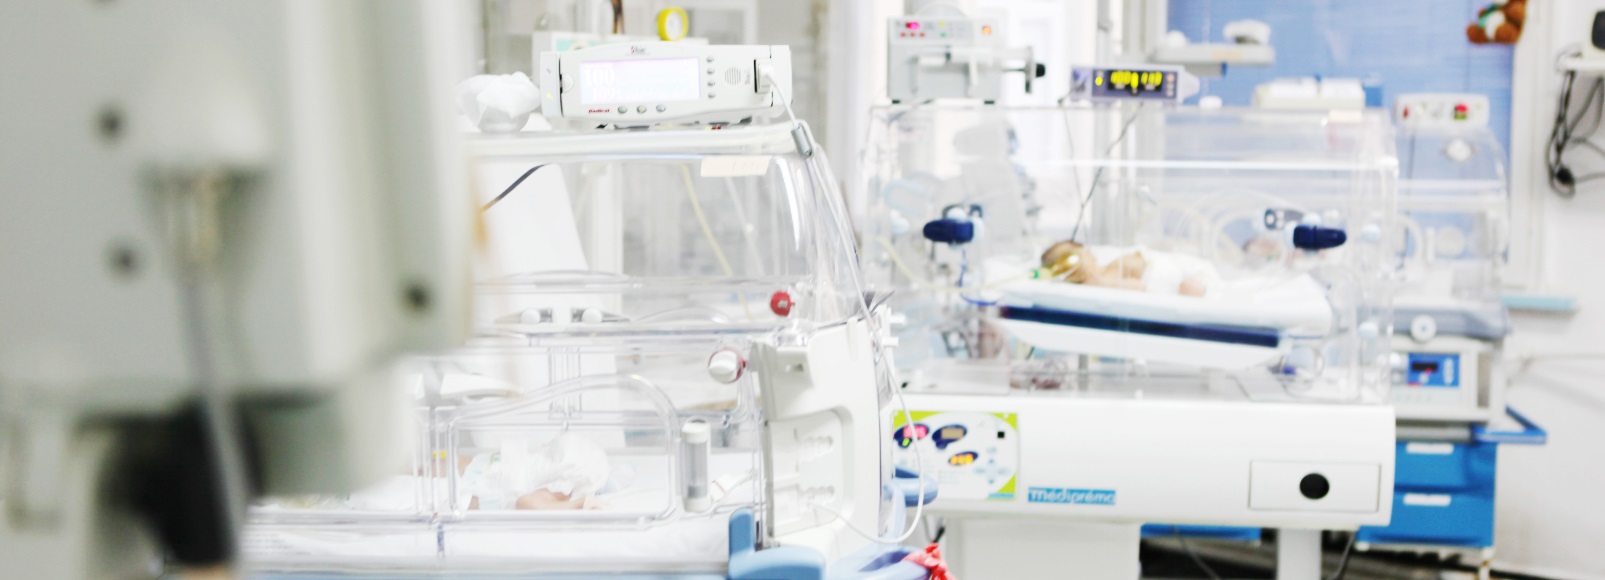 babies in the nicu surrounded by equipment